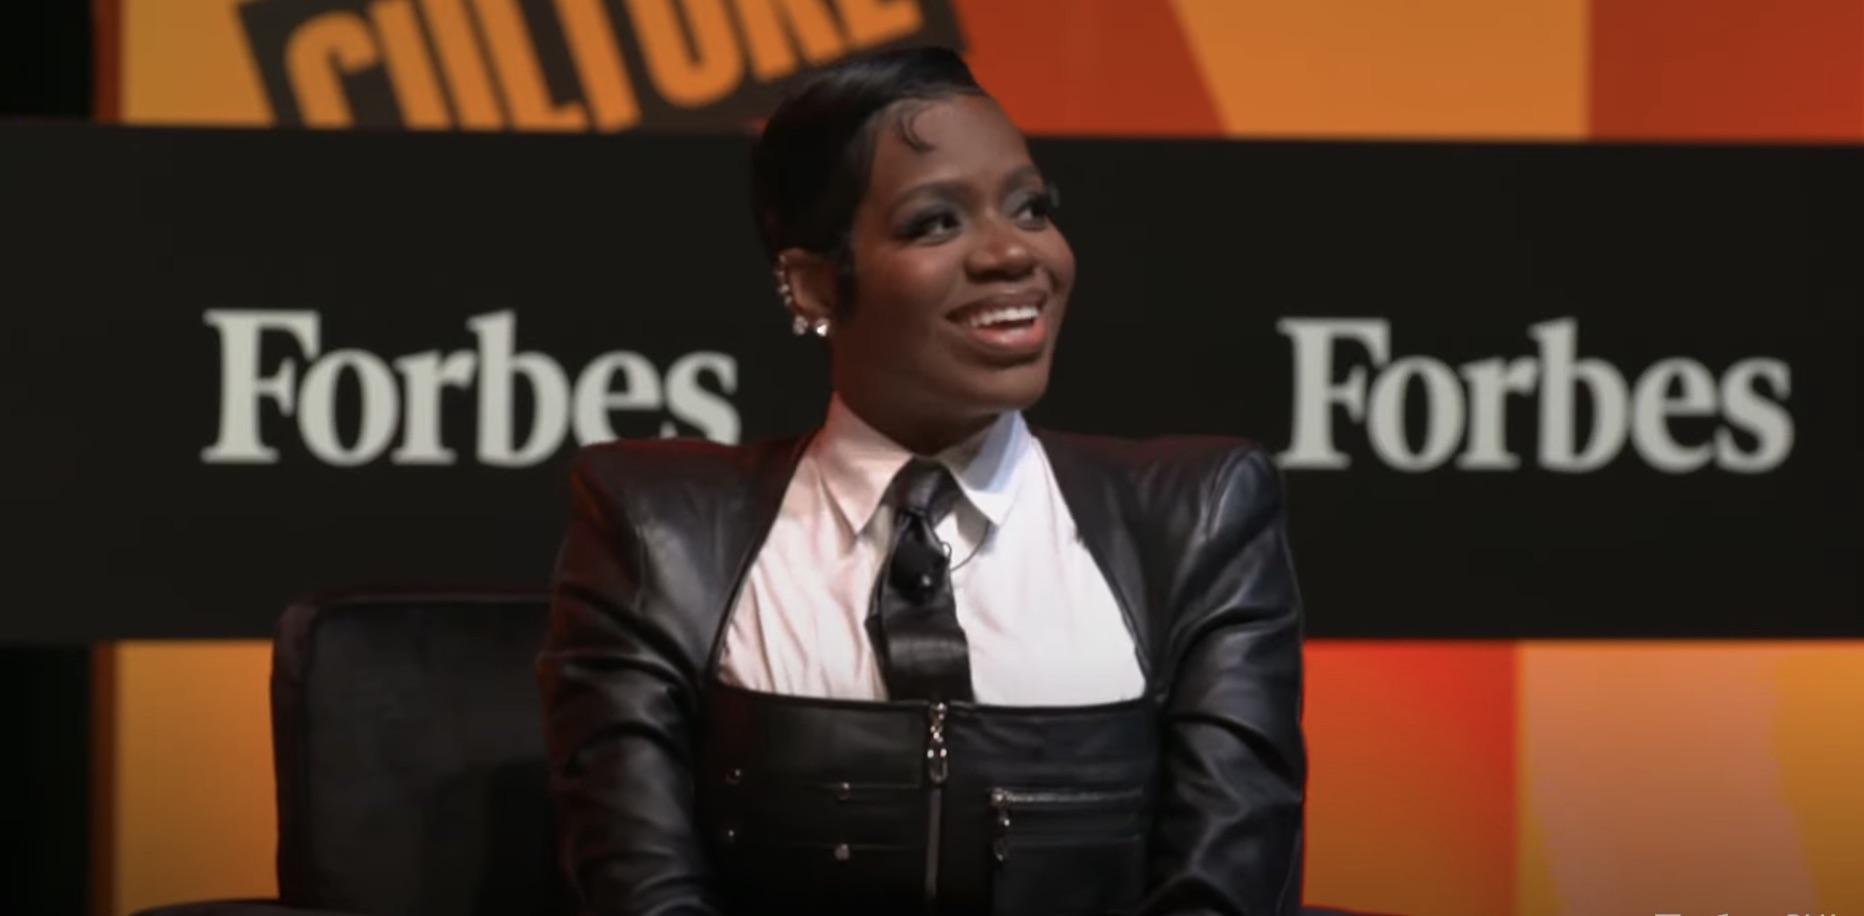 Fantasia CONFIRMS New Music: “Now It’s Time to Get Back Into the Studio”